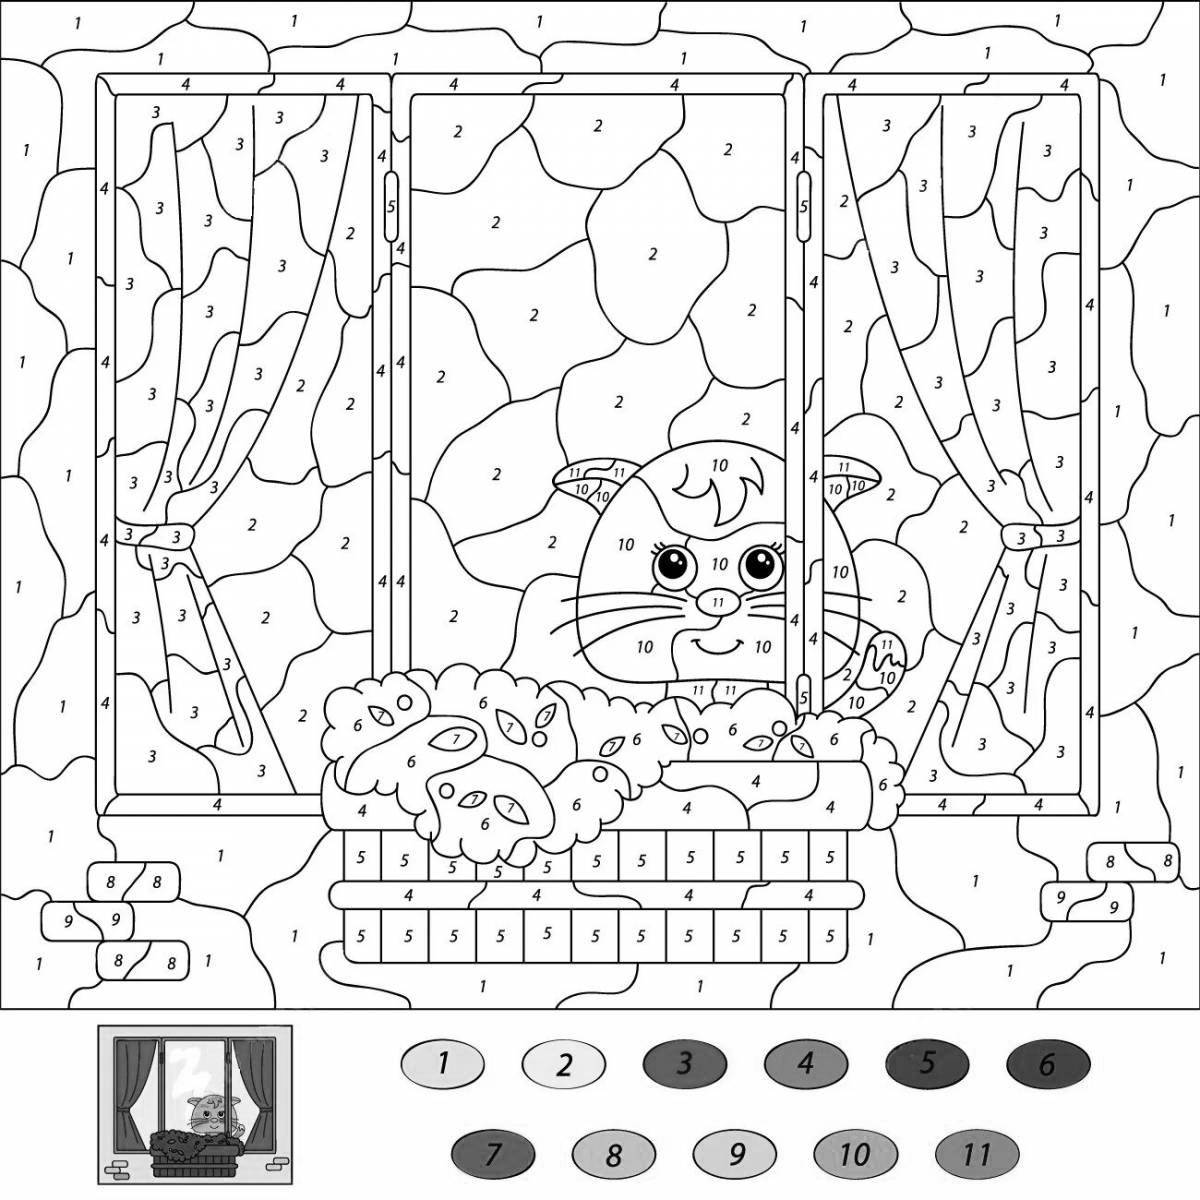 Joyful cat coloring by numbers